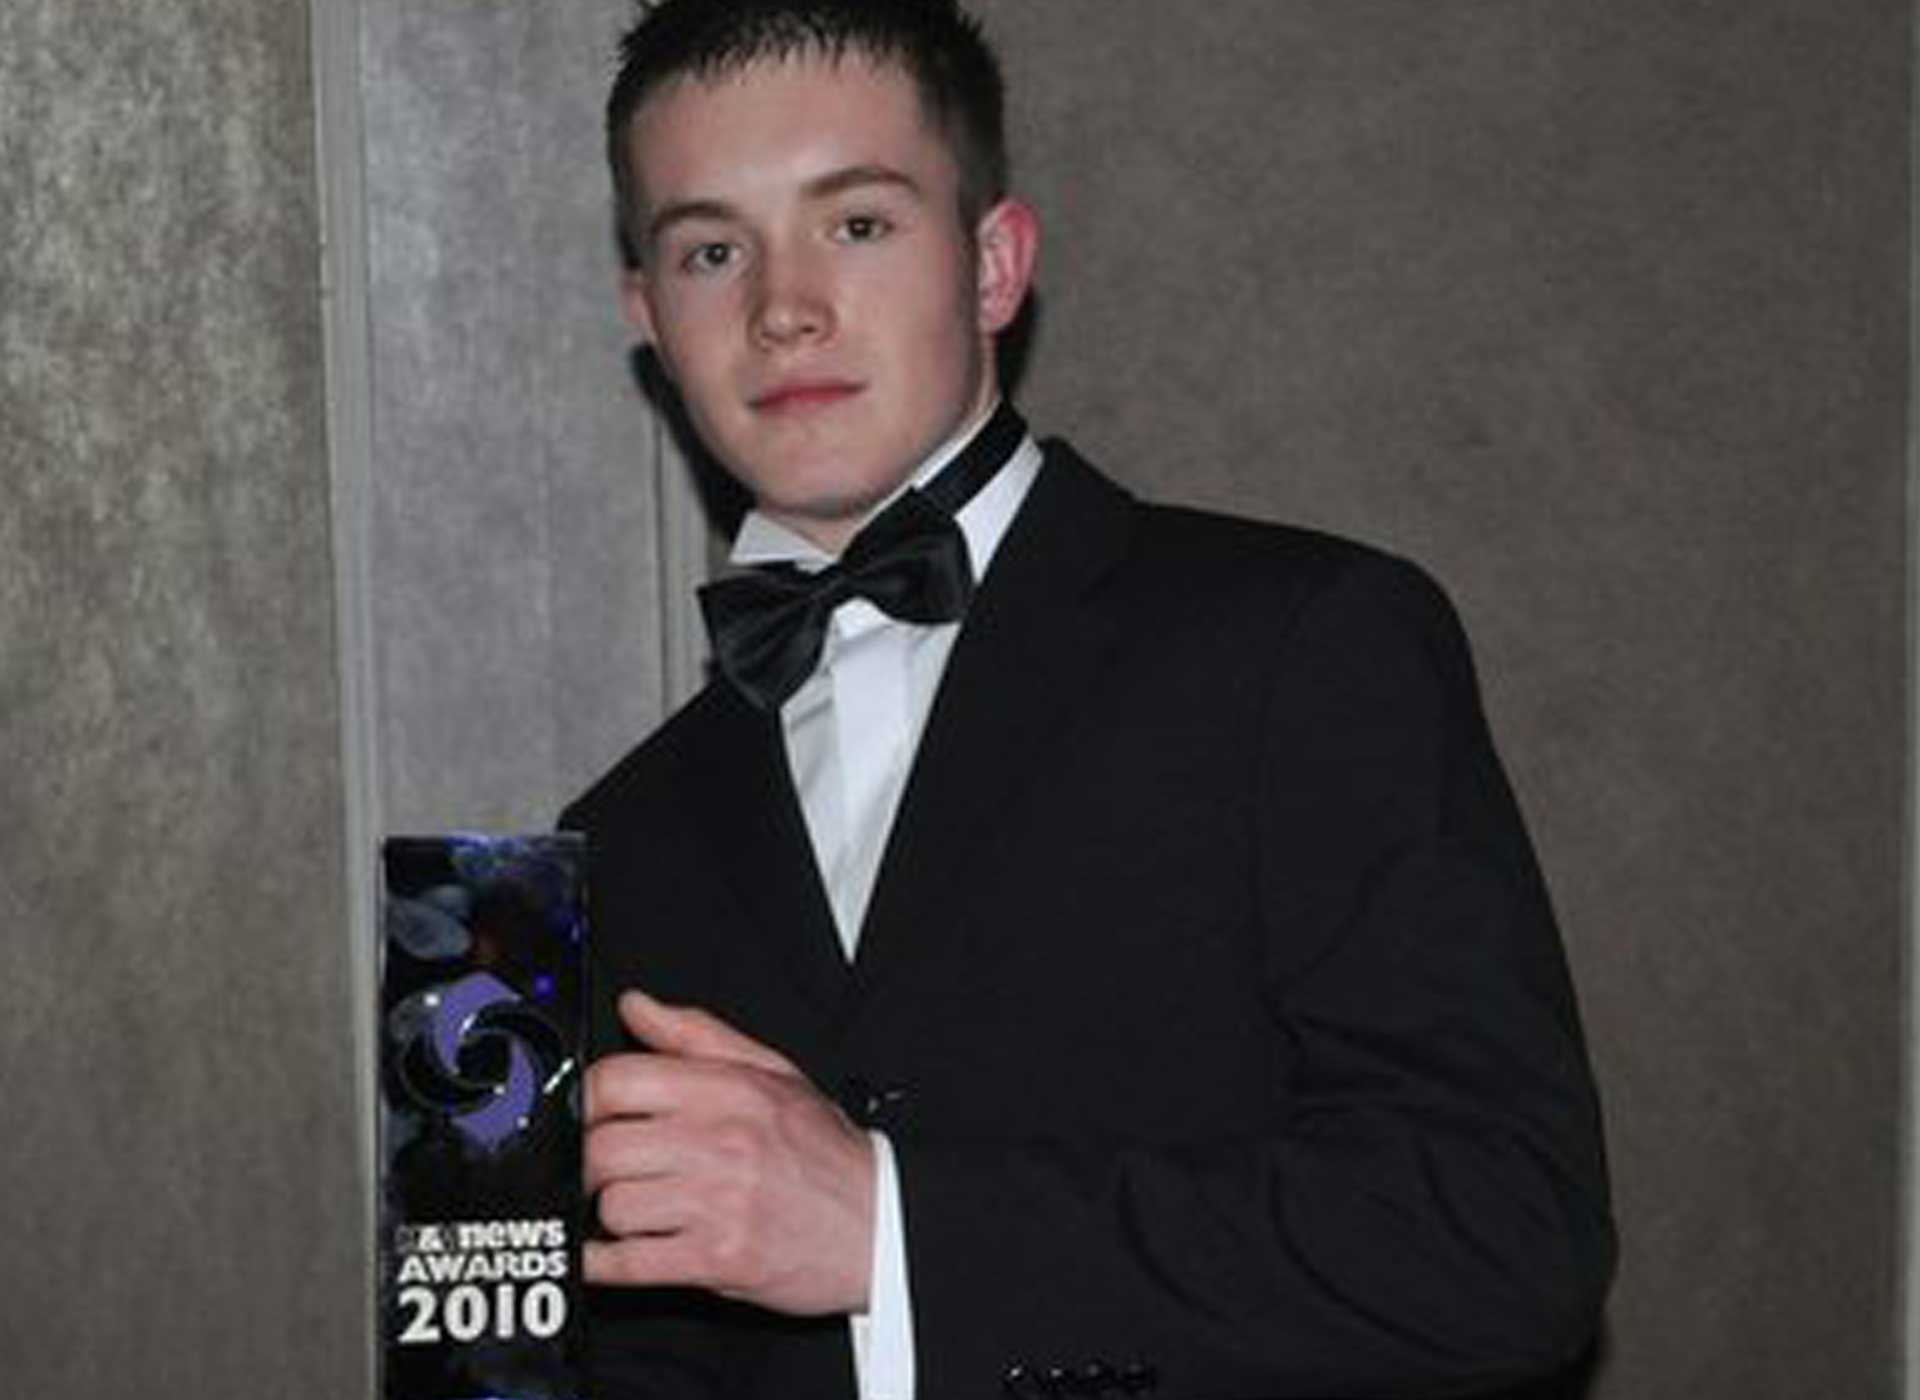 Apprentice of the Year Award